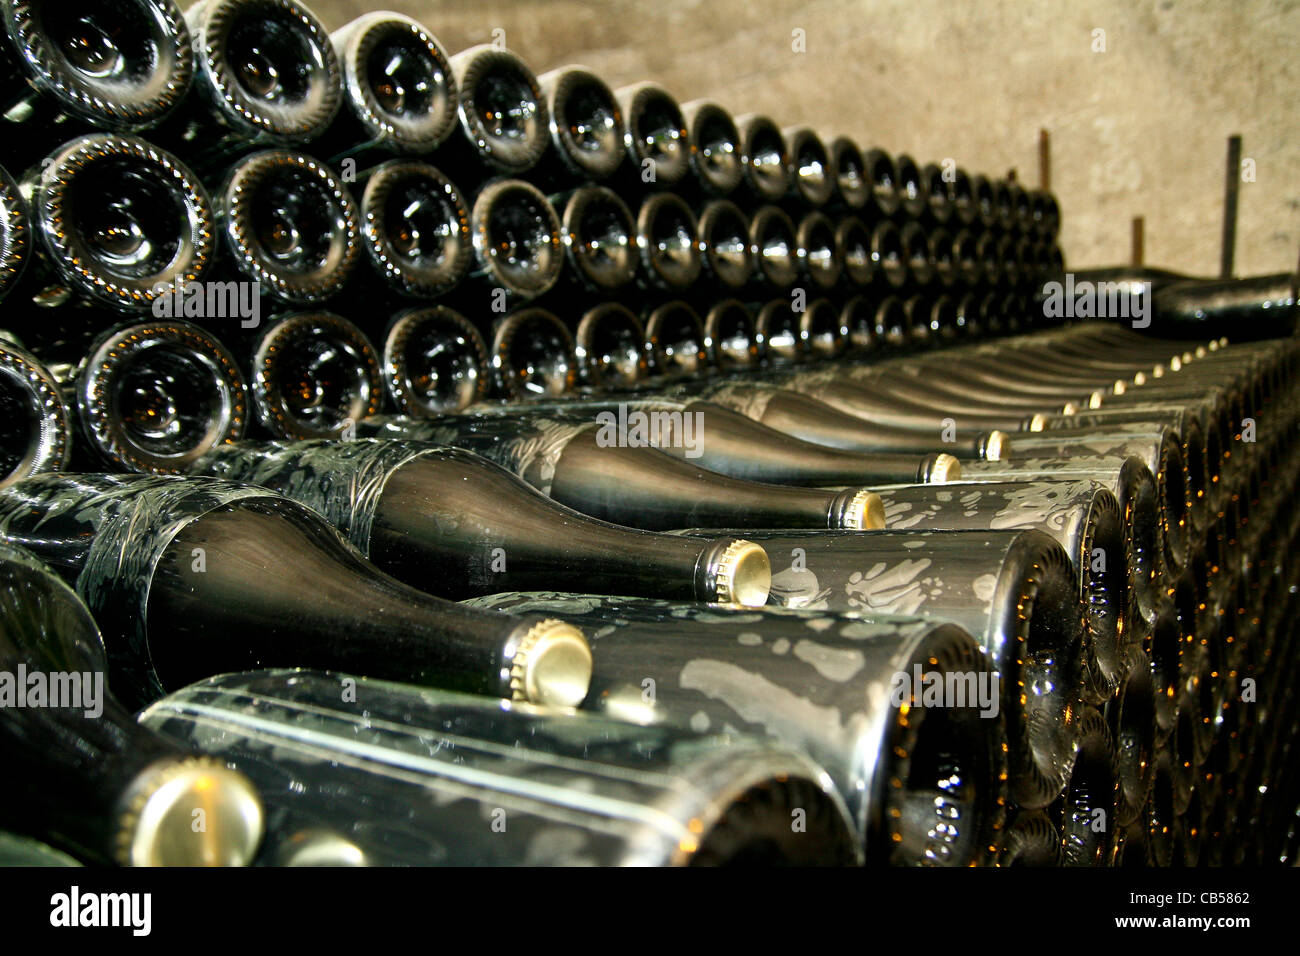 Champagne bottles fermenting in the cellars of Champagne Taittinger in Reims France Stock Photo